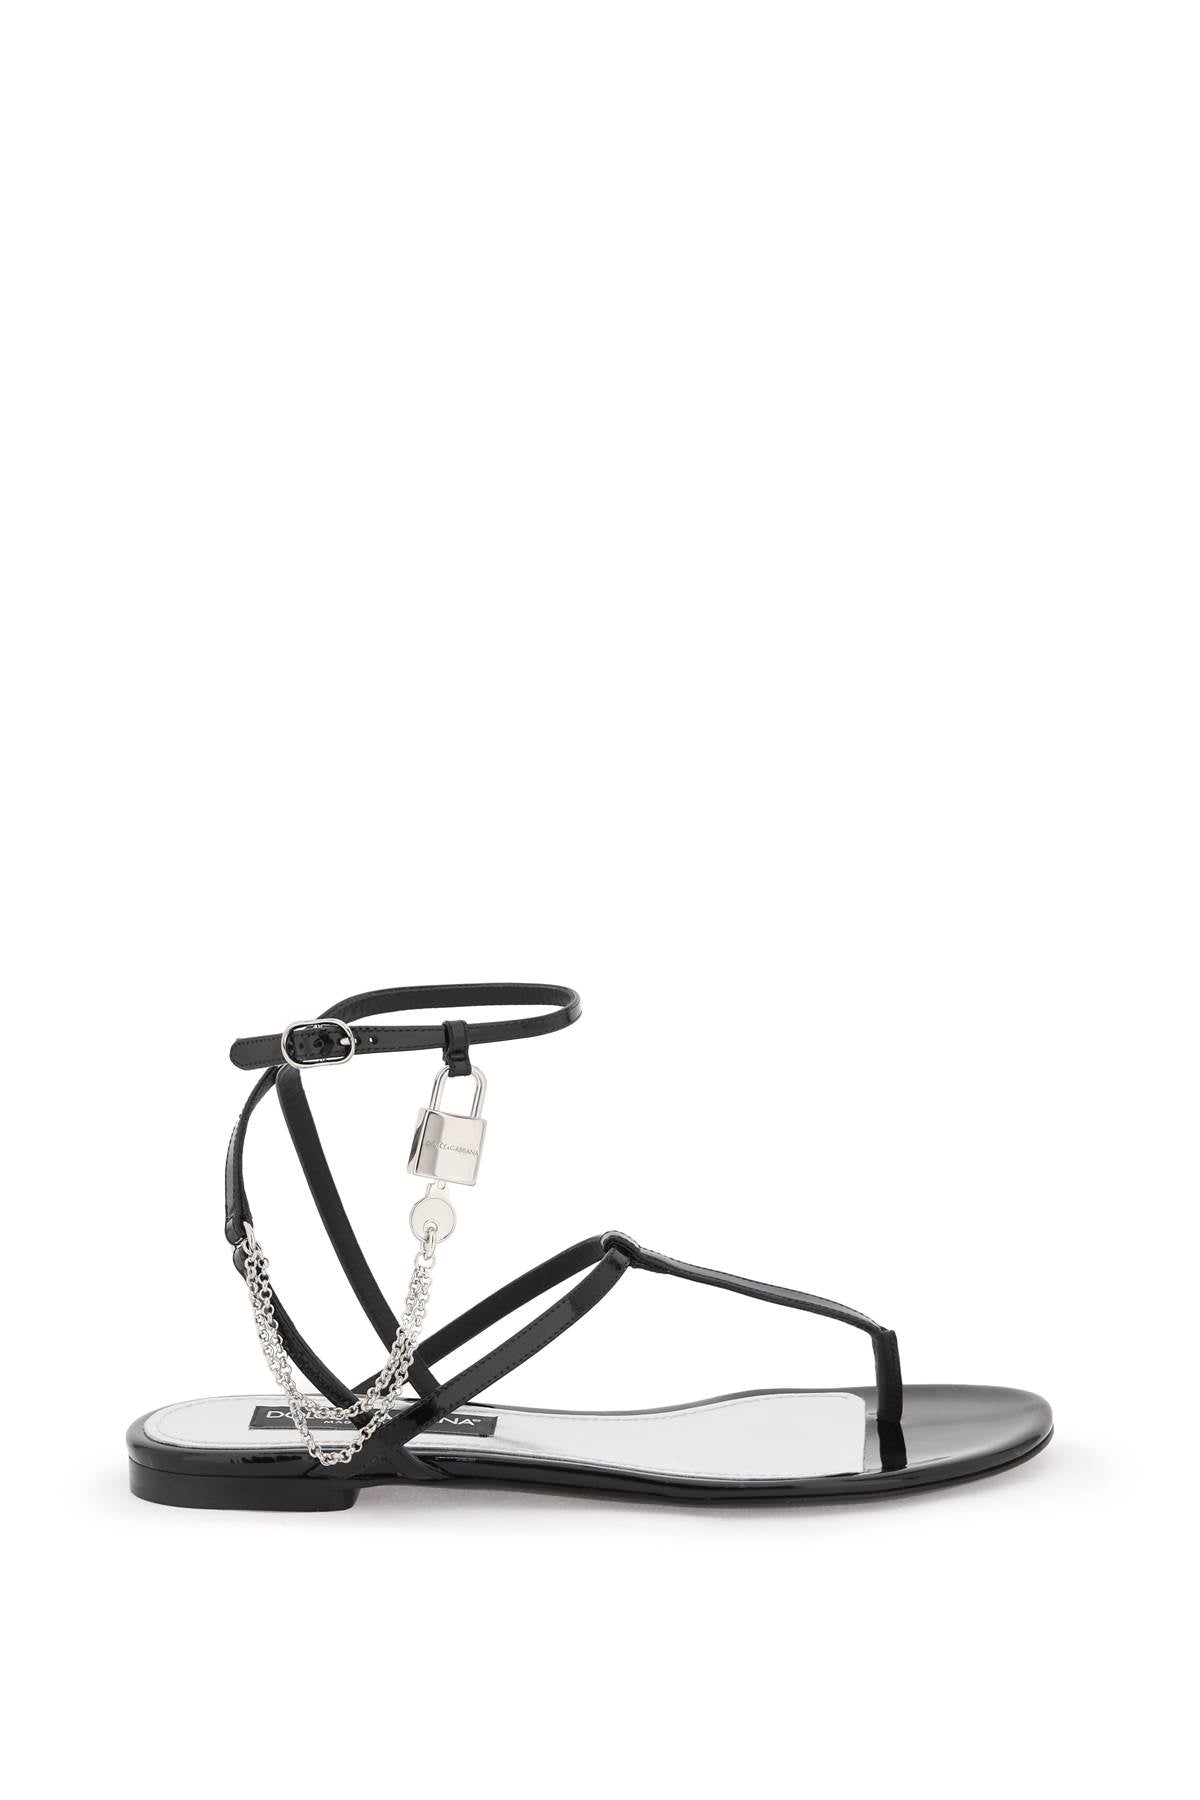 Shop Dolce & Gabbana Black Patent Leather Thong Sandals With Padlock For Women